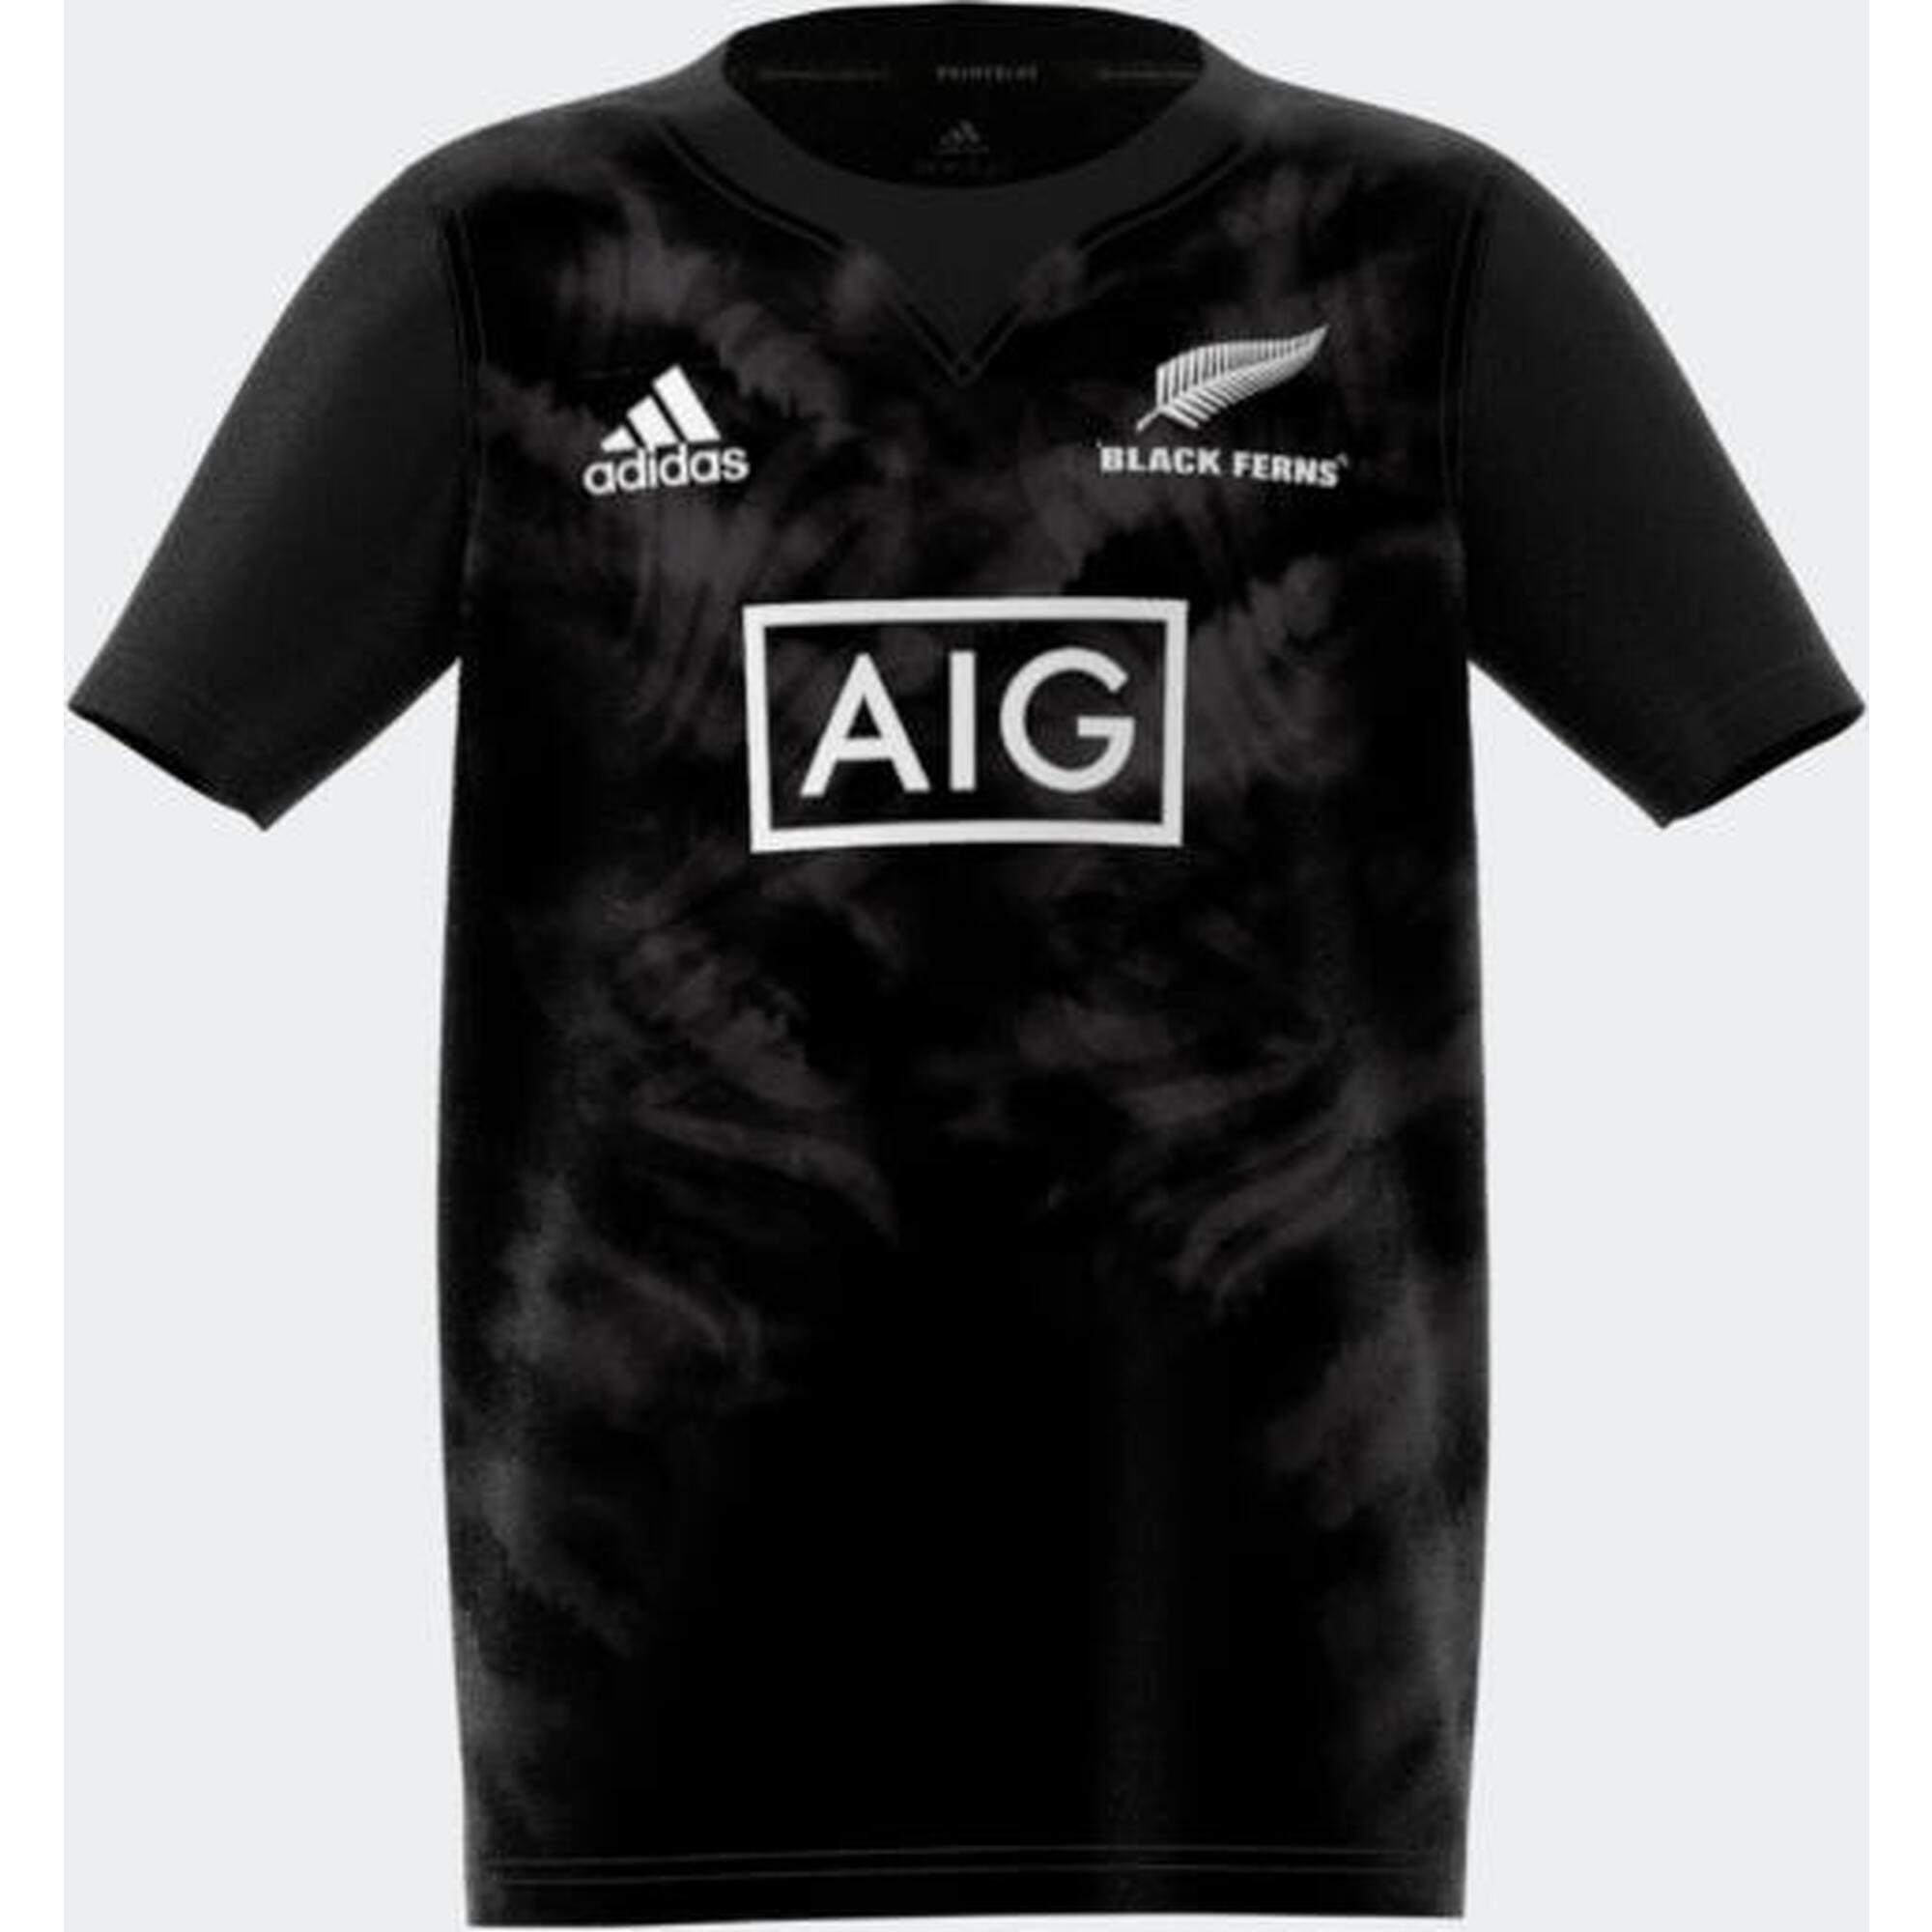 ADIDAS adidas Kids New Zealand Black Ferns Rugby Primeblue Supporters Home Rugby Shirt